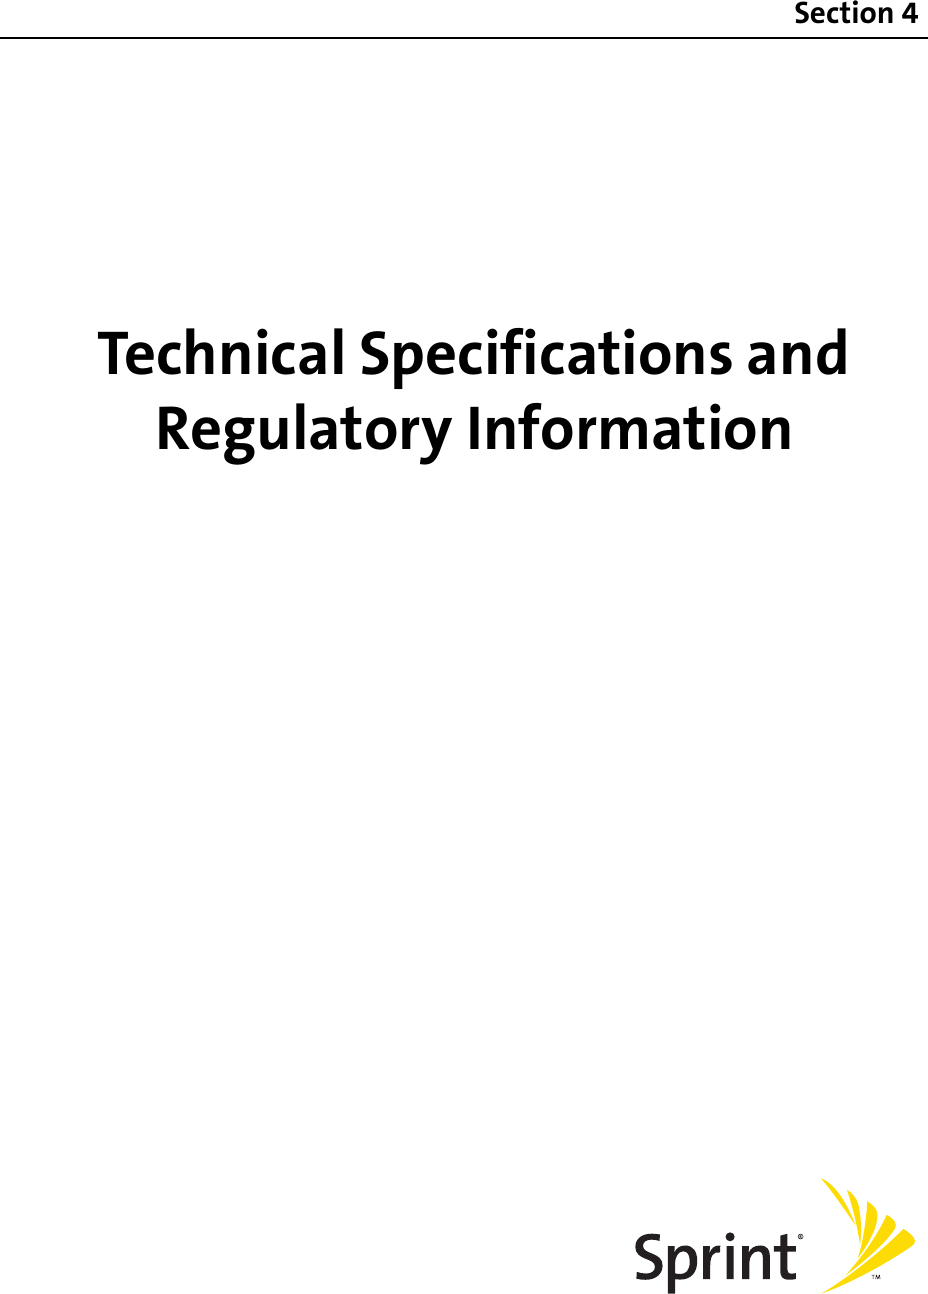 Technical Specifications and Regulatory InformationSection 4